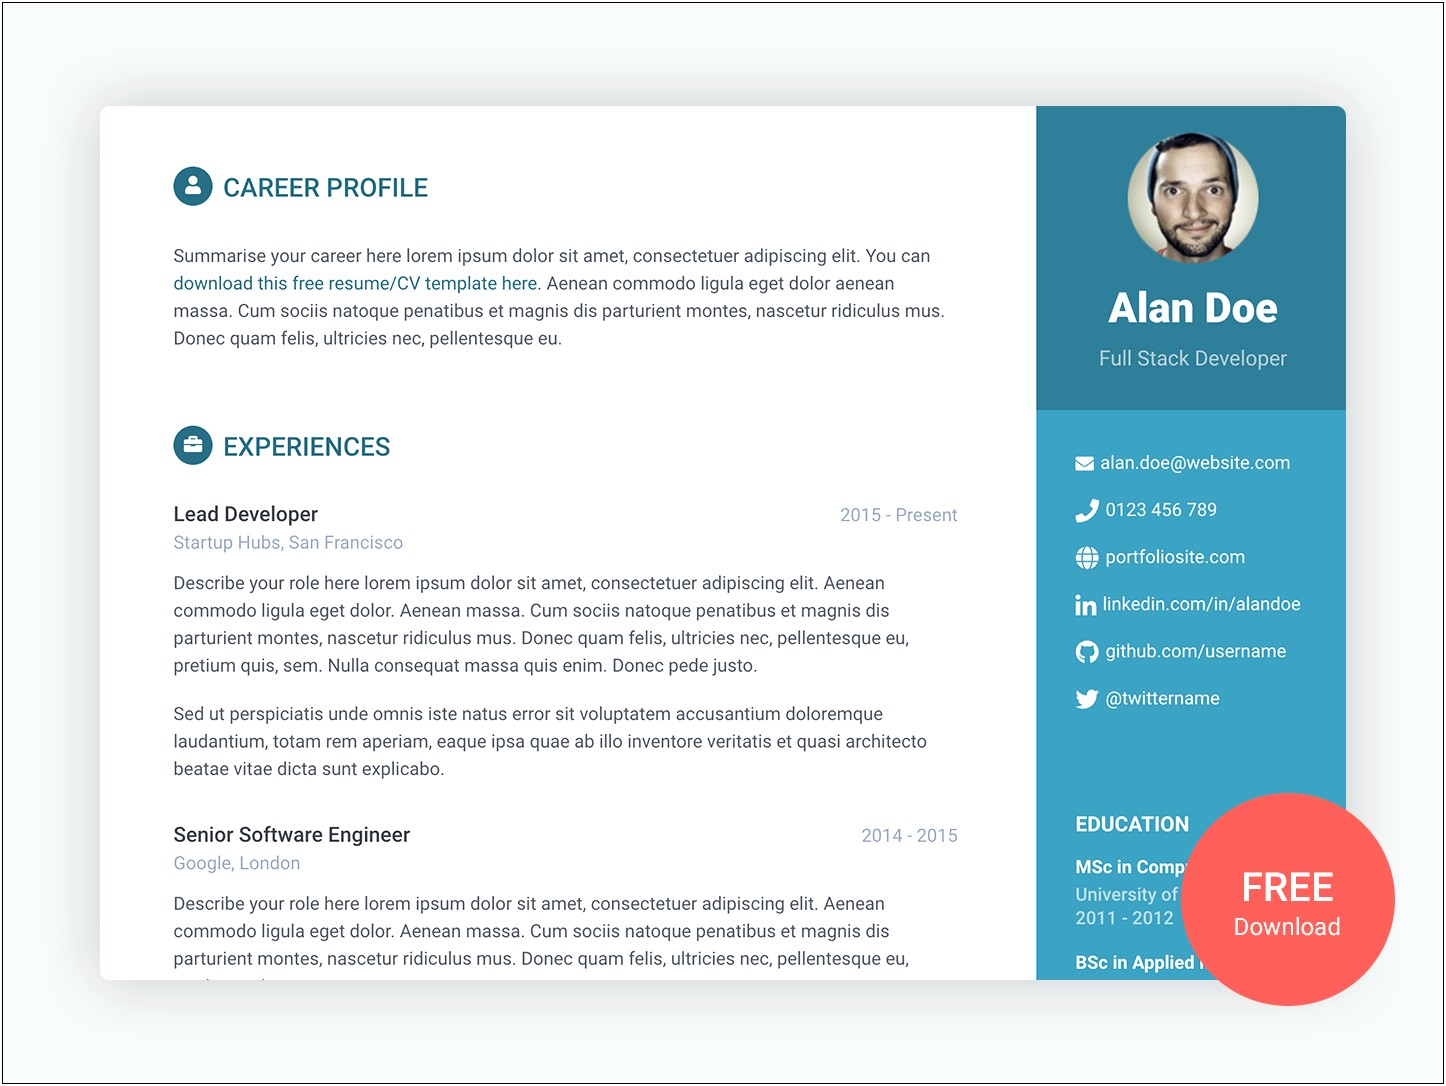 Resume Website Template Bootstrap Free